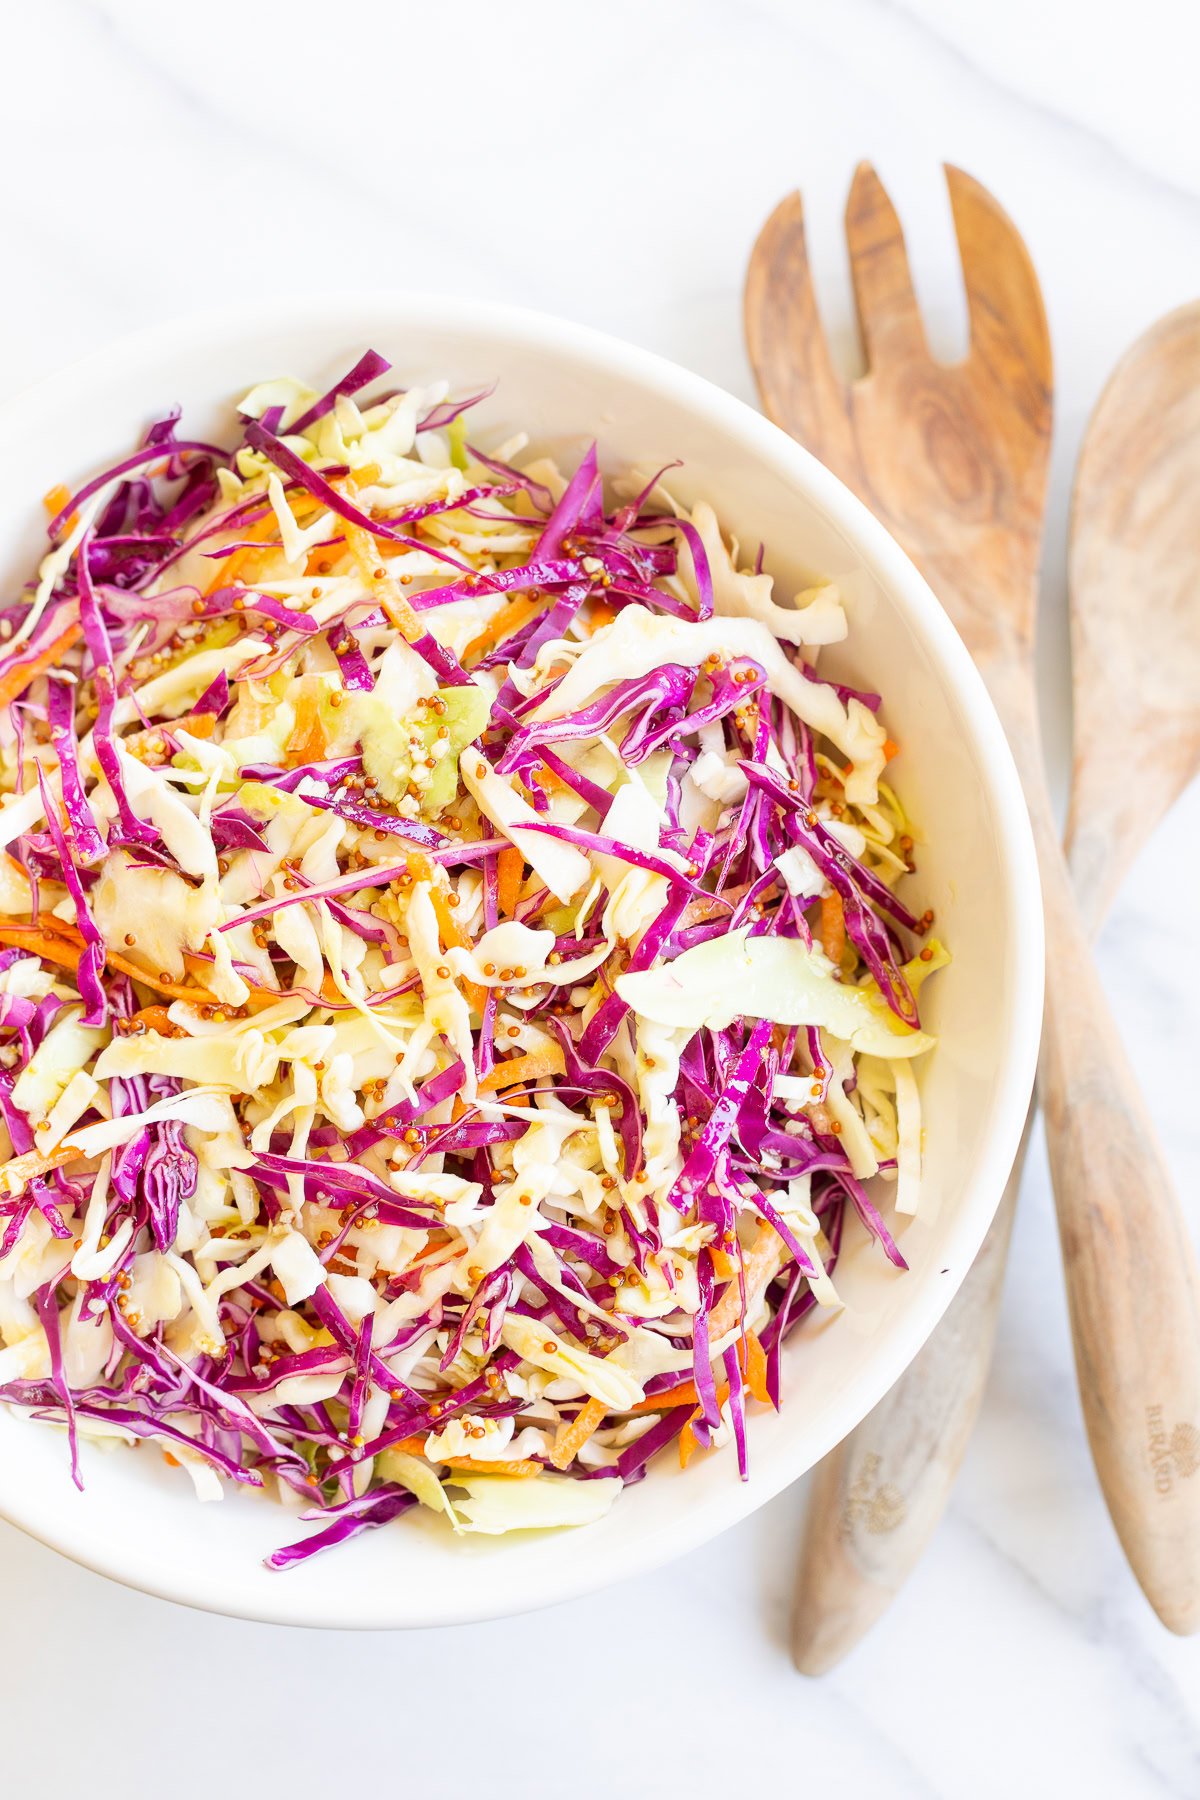 A bowl of colorful coleslaw with shredded cabbage and carrots, perfect among burger sides, accompanied by wooden salad serving utensils on a white marble surface.